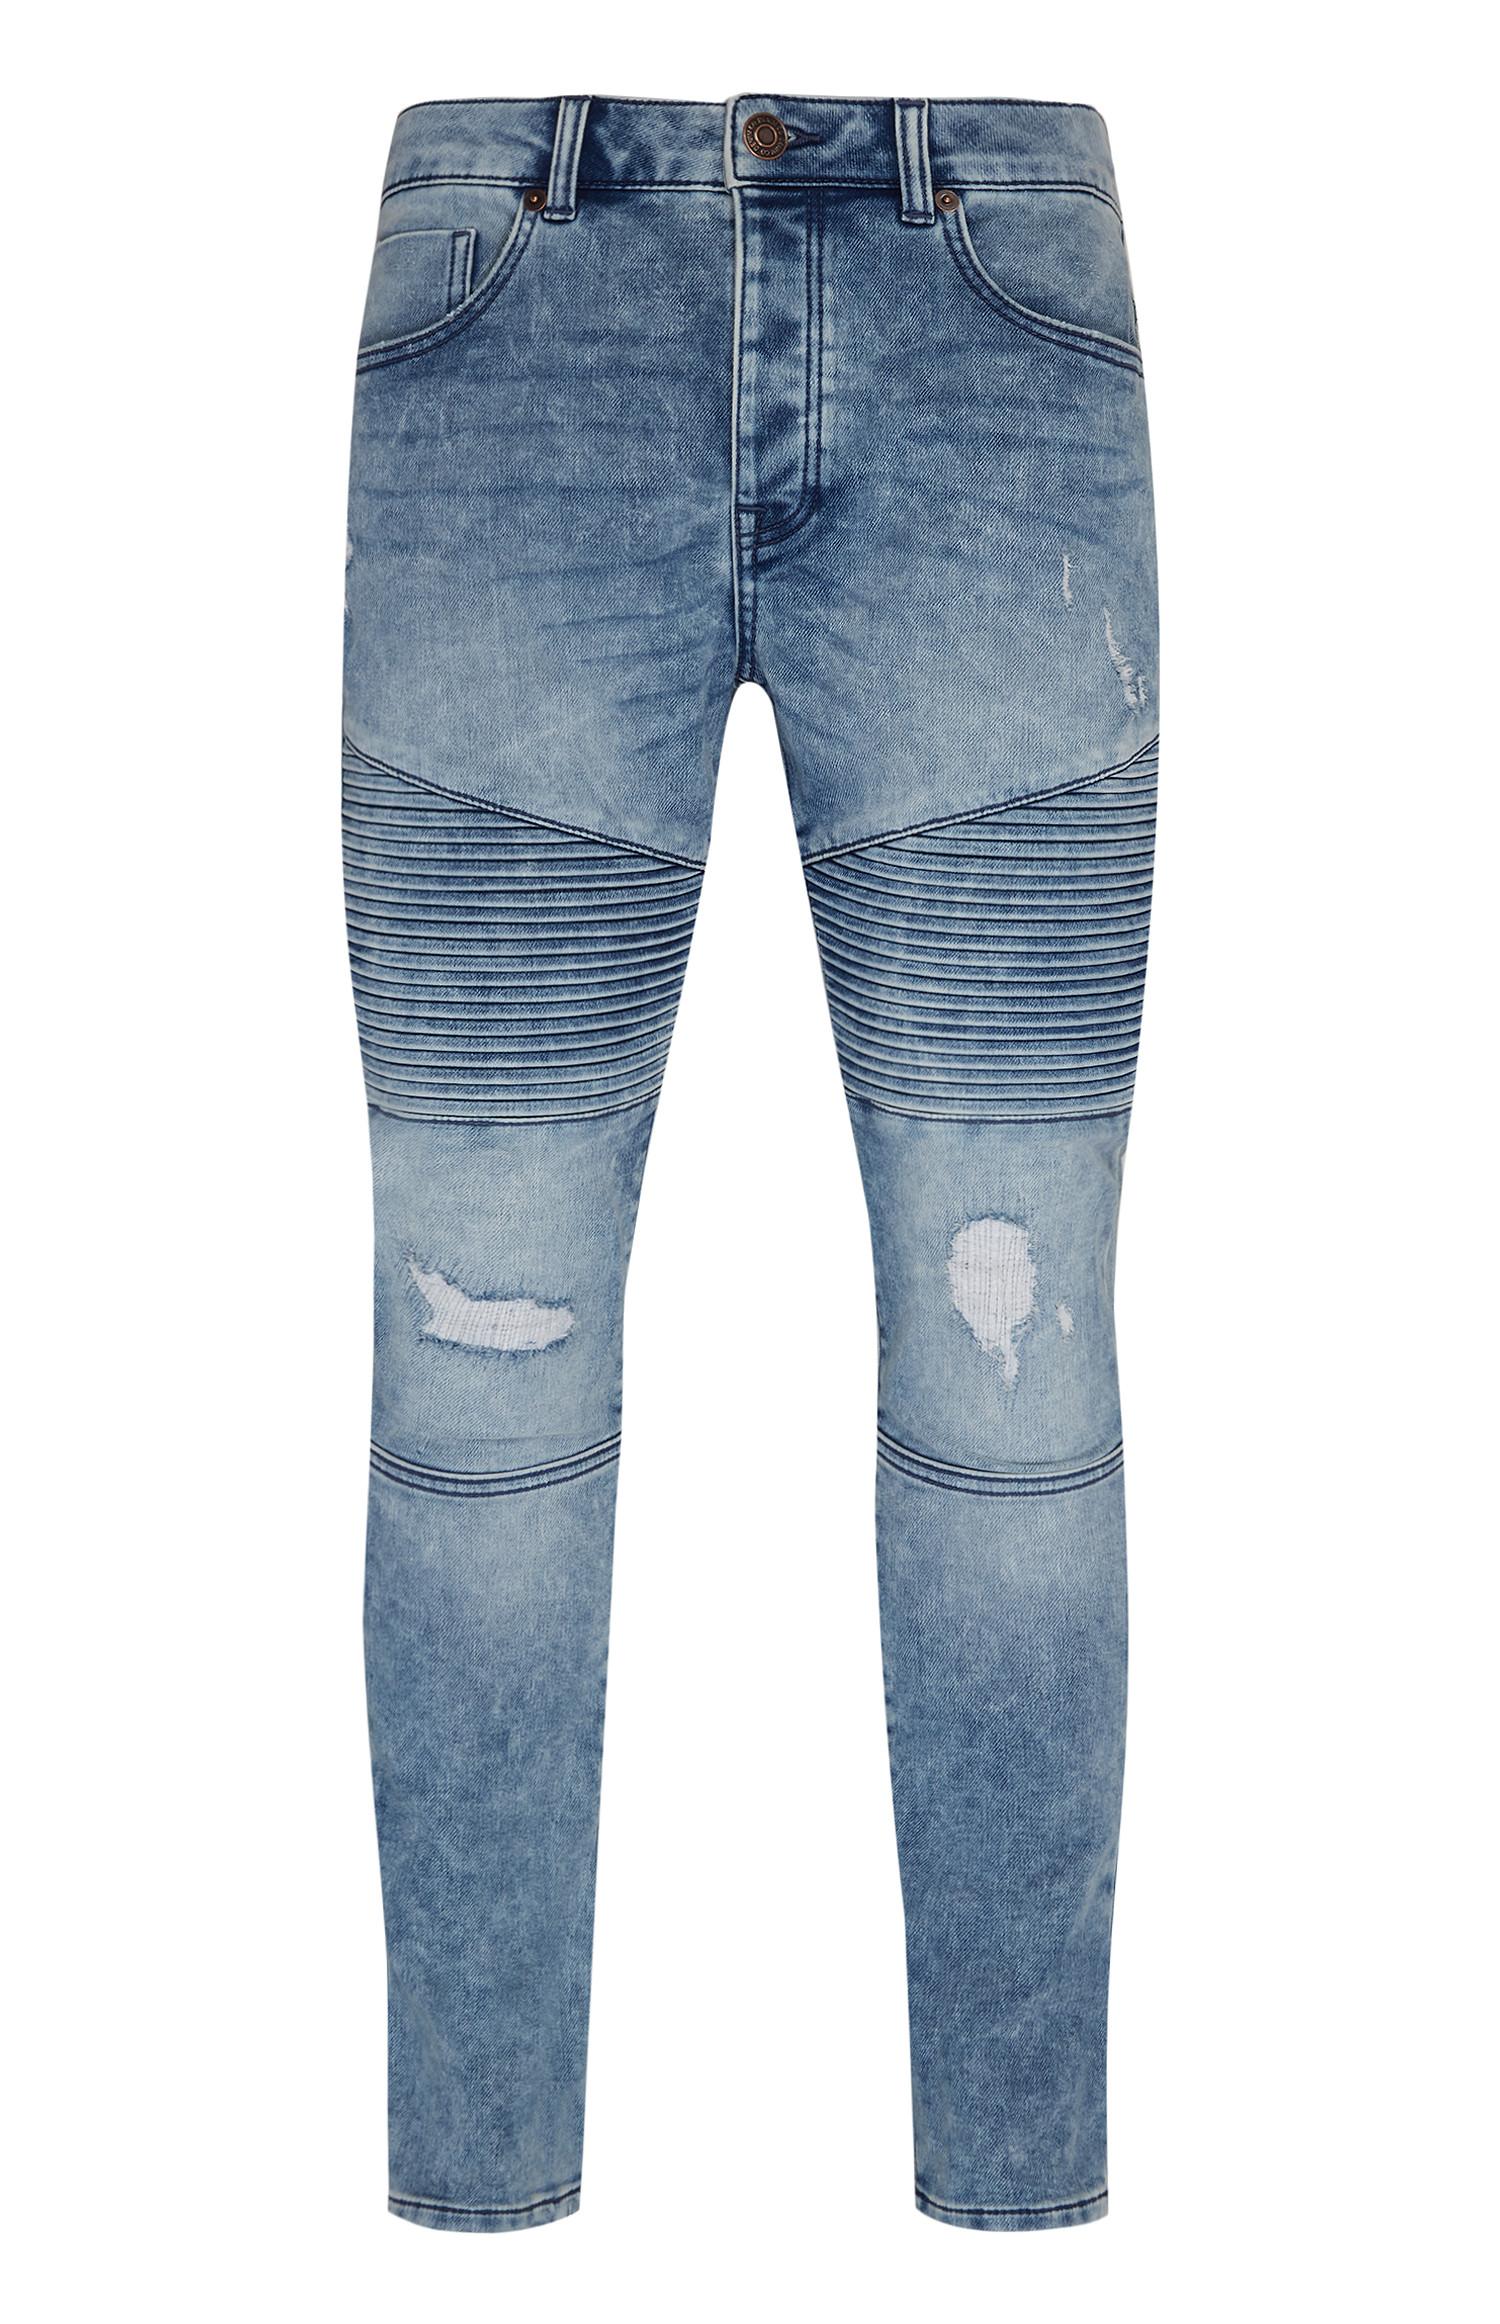 ripped jeans mens primark